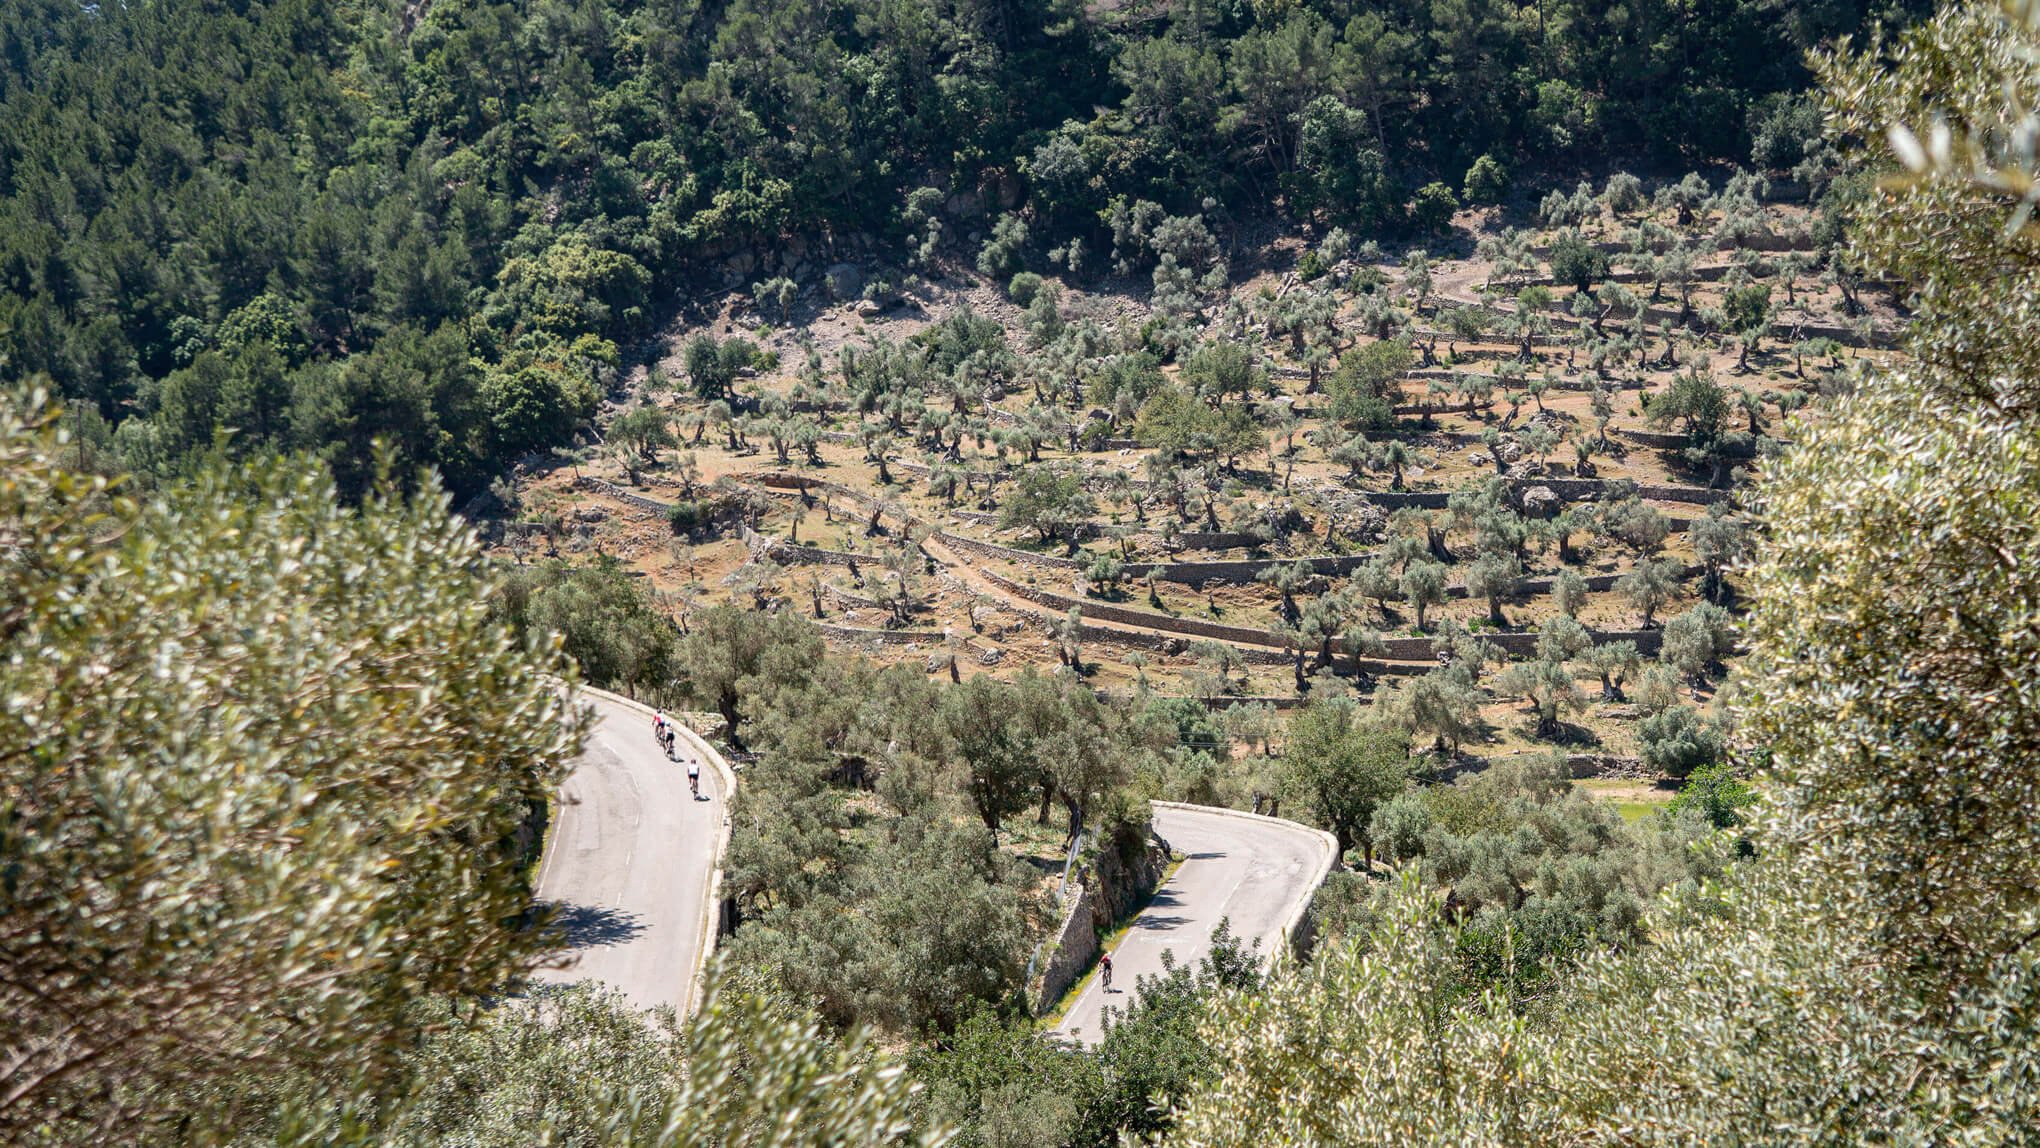 Olive trees around the Col de Soller road